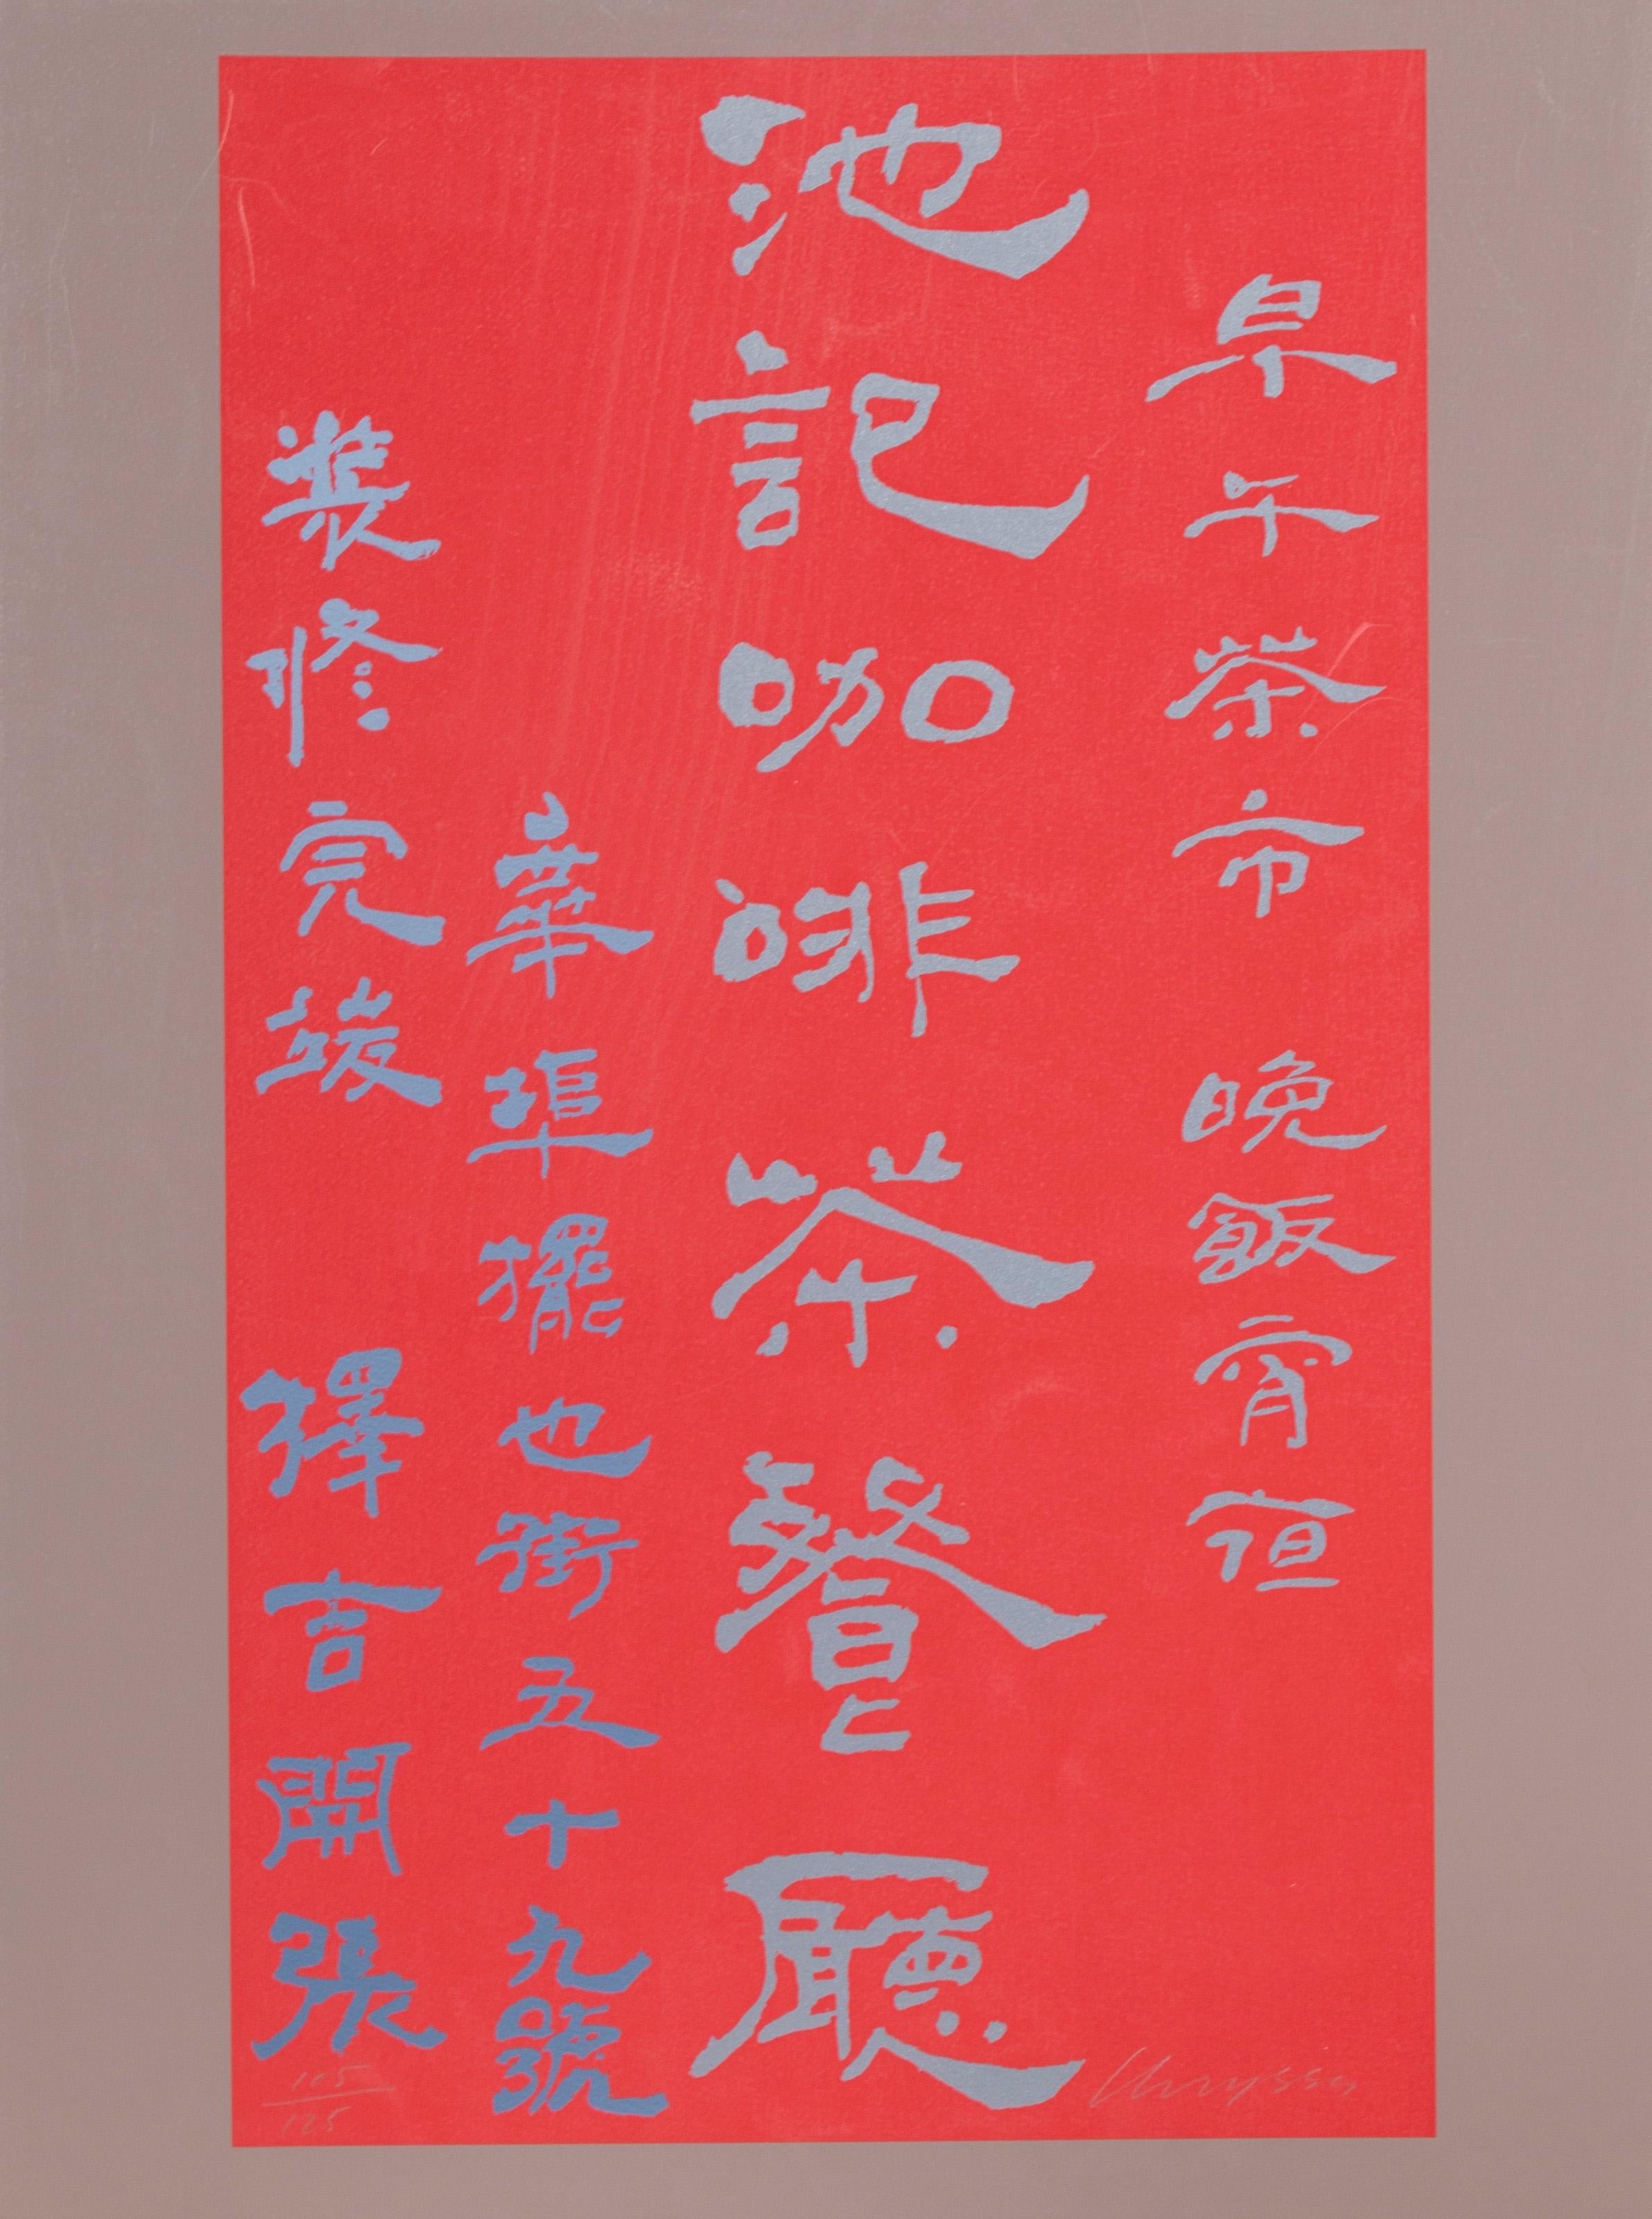 Untitled - Chinese Characters - Conceptual Art Screenprint by Chryssa